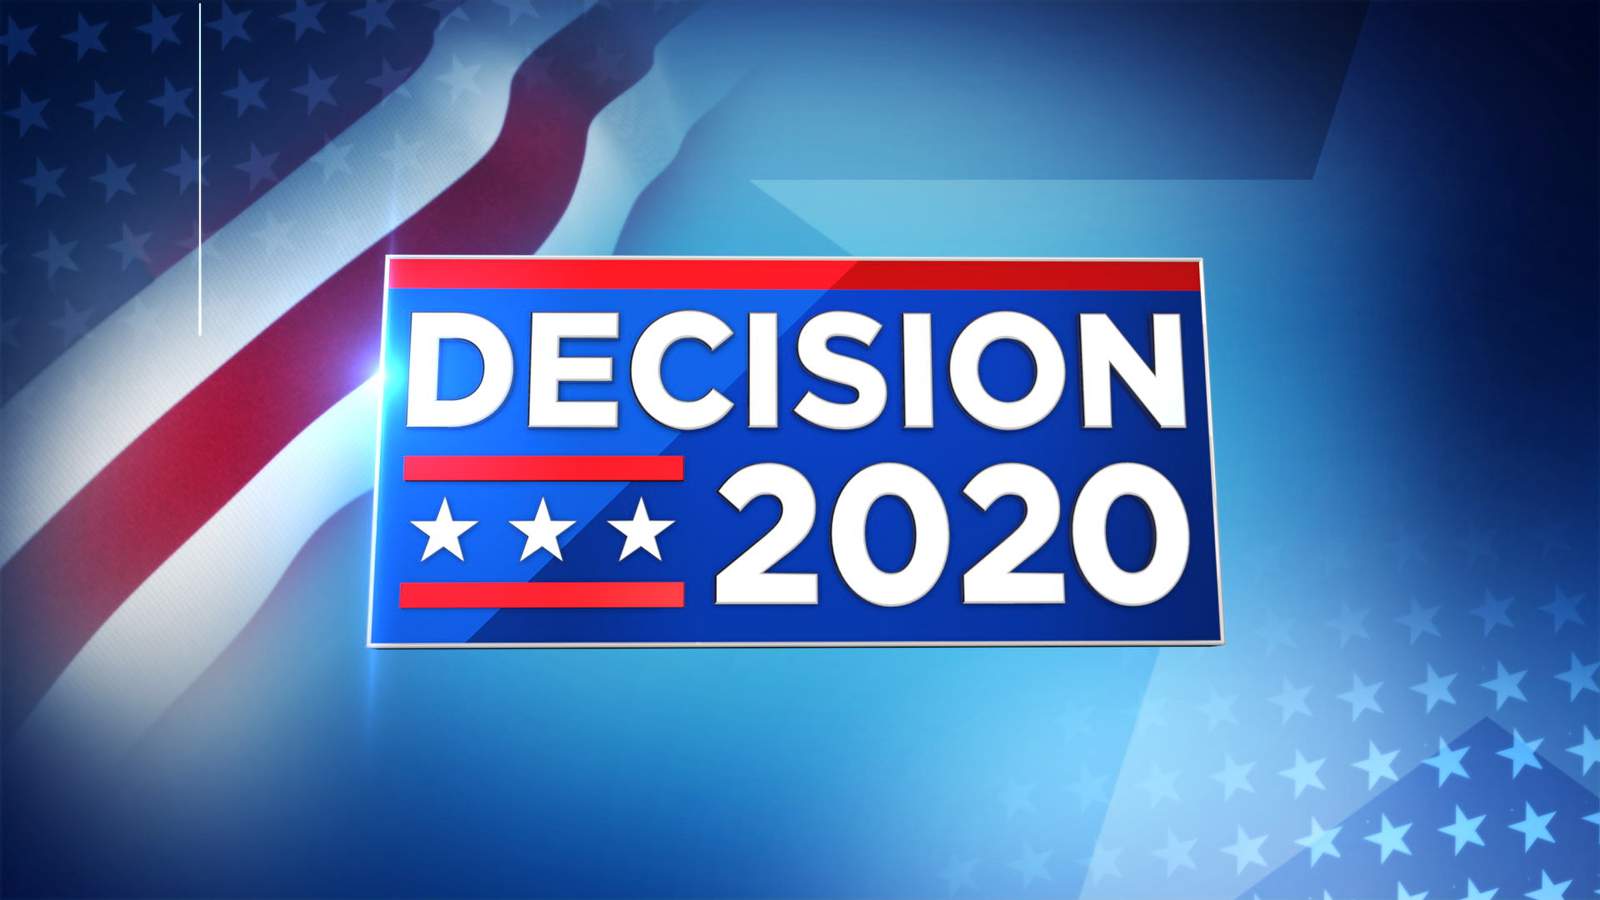 Michigan Primary Election Results for Orion Township on Aug. 4, 2020